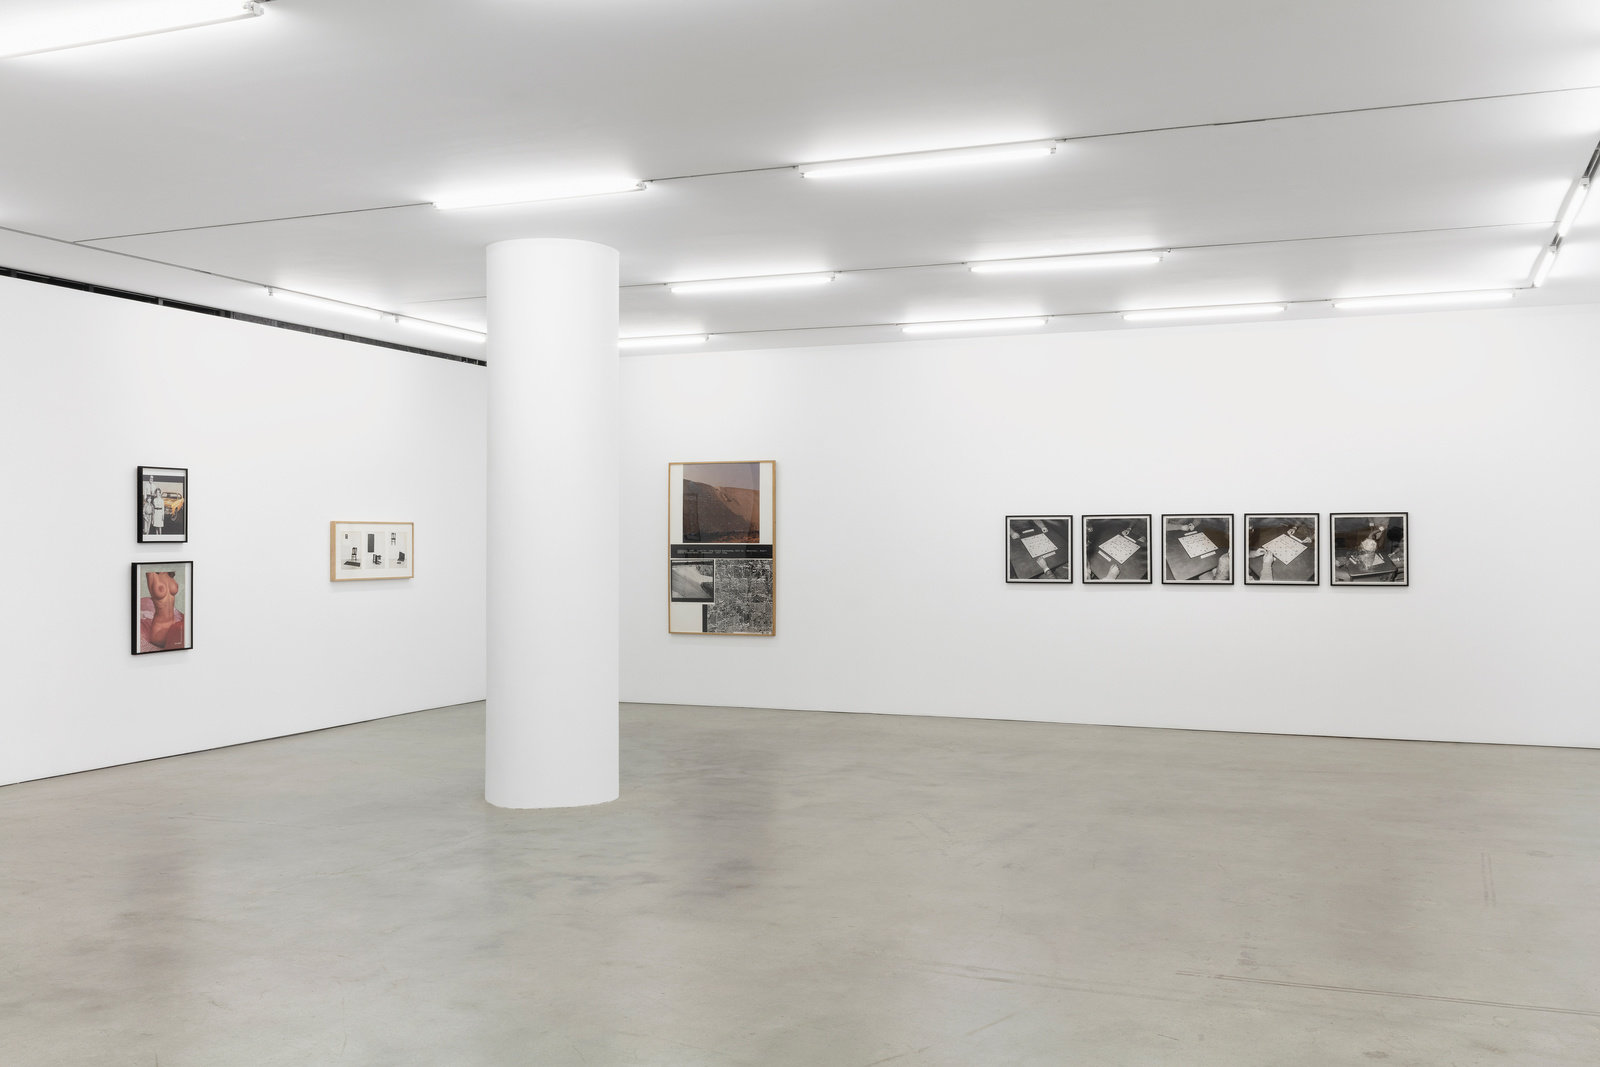 An installation view of four works hung on adjacent gallery walls. 